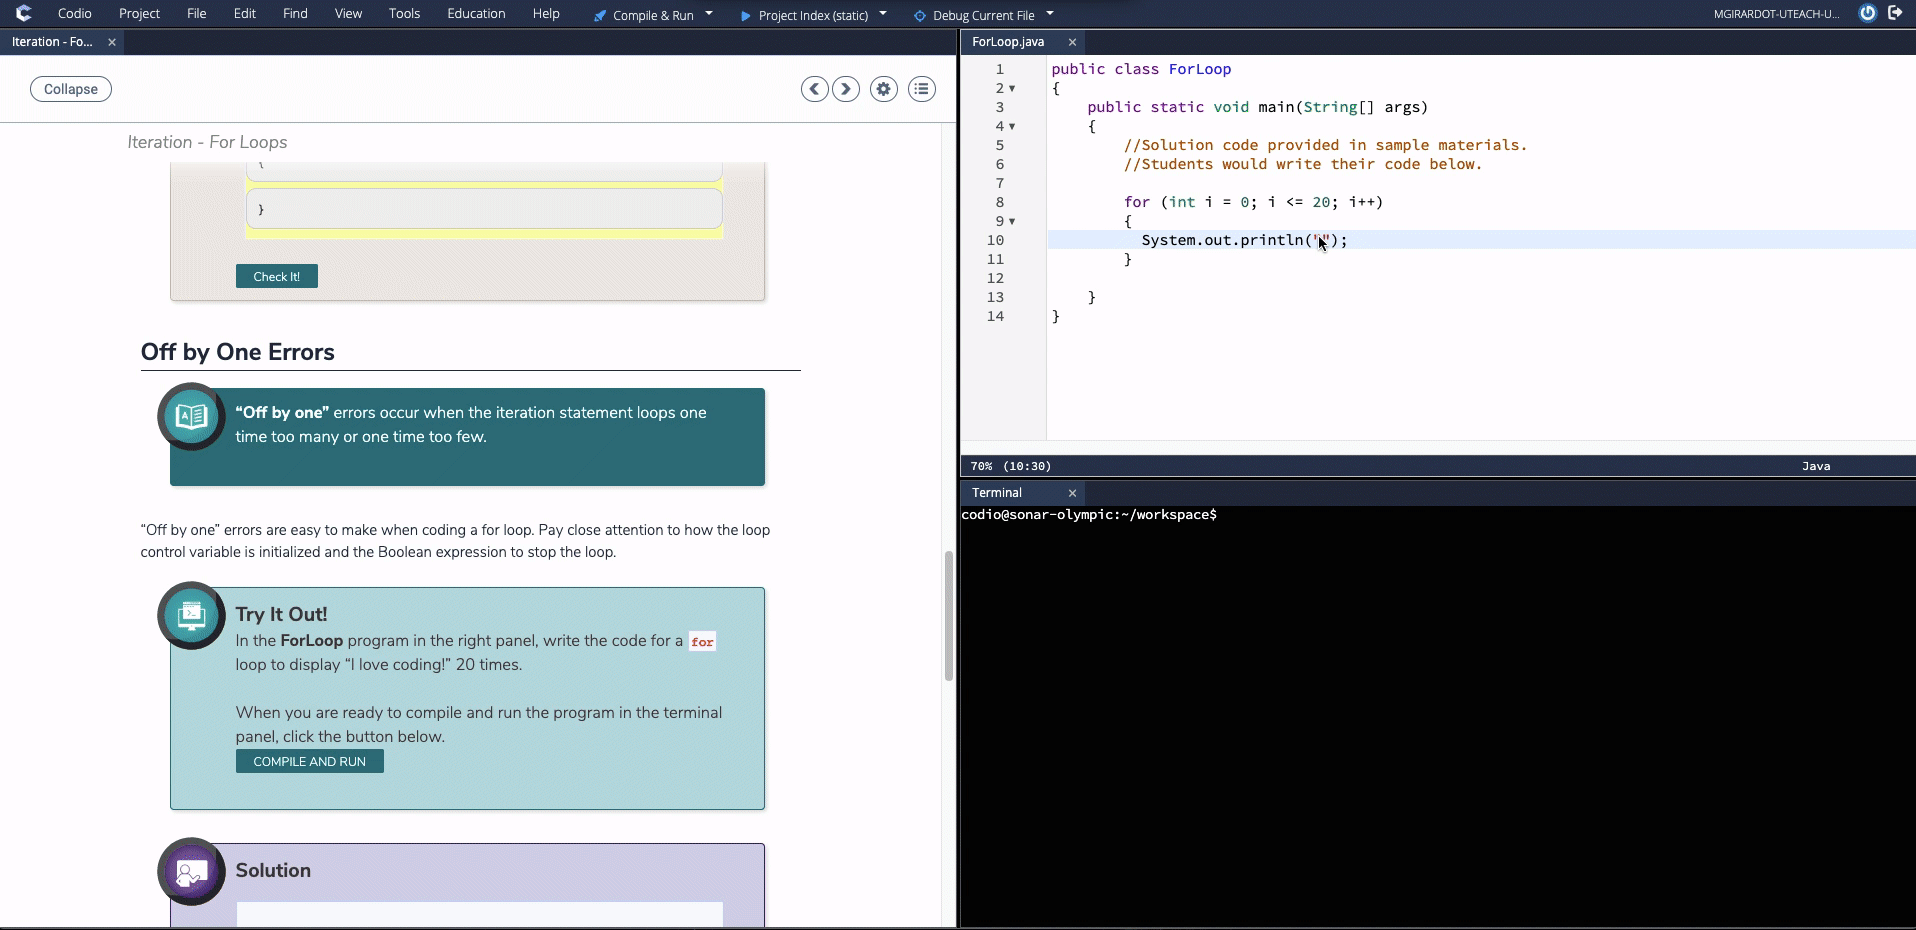 GIF showing how students master Java concepts through embedded assessments and programming in the built-in text editor, compiler, and debugger